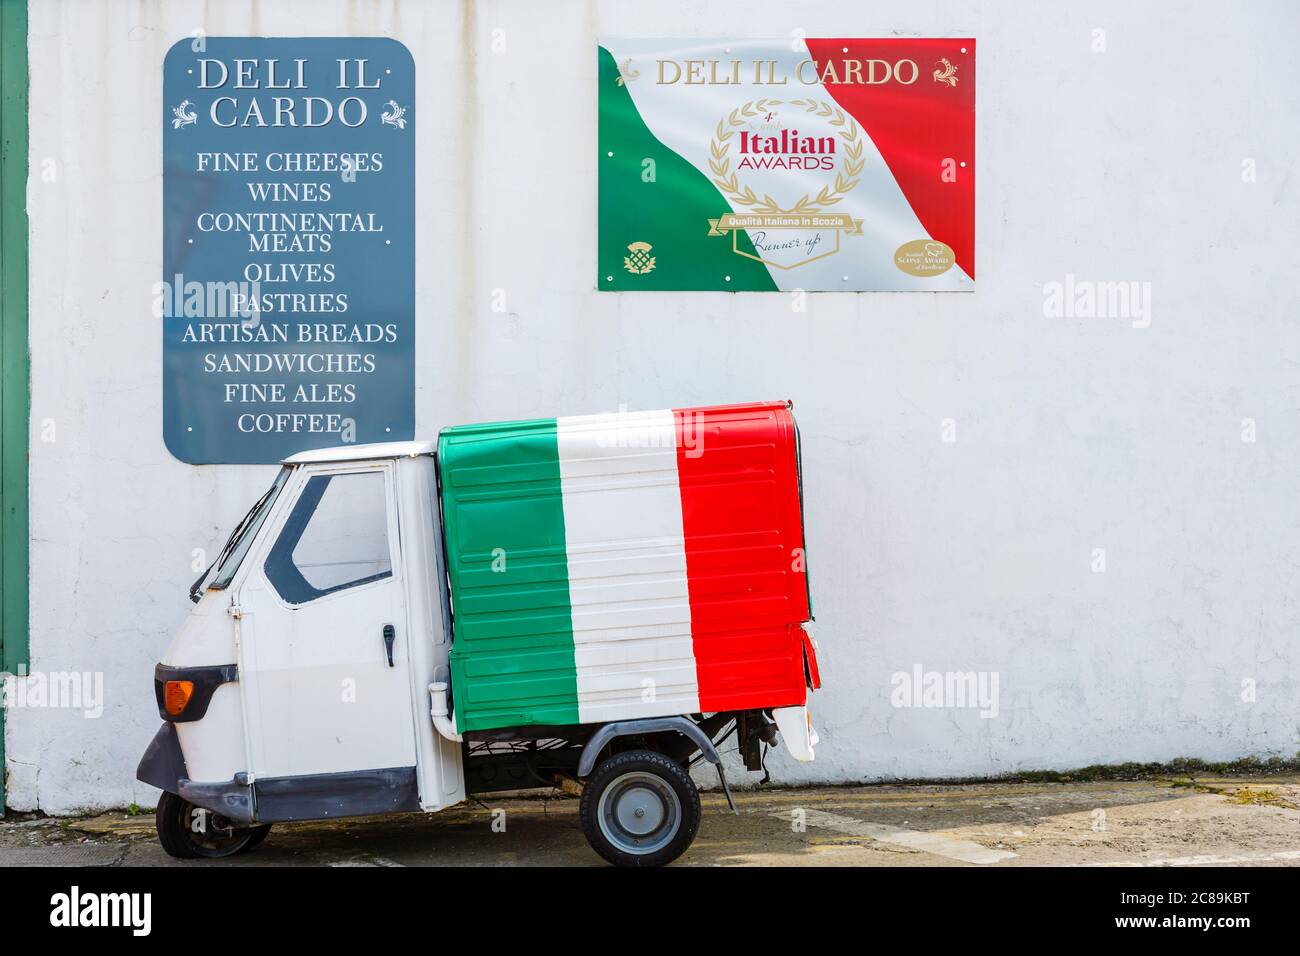 Largs, North Ayrshire, Scotland, UK. Deli Il Cardo café signs and a Piaggio Ape 50 delivery van painted with the colours of the Italian National Flag Stock Photo